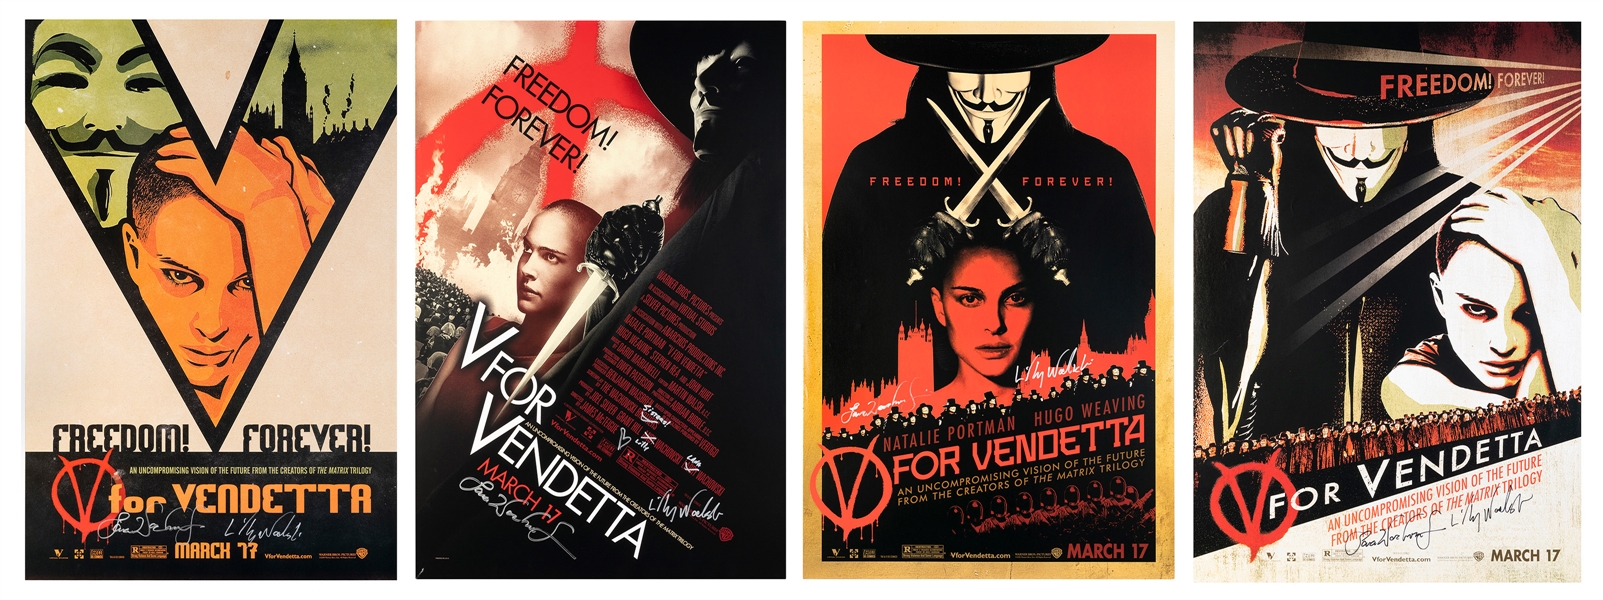  A Group of 20 V for Vendetta Posters Signed by the Wachowsk...